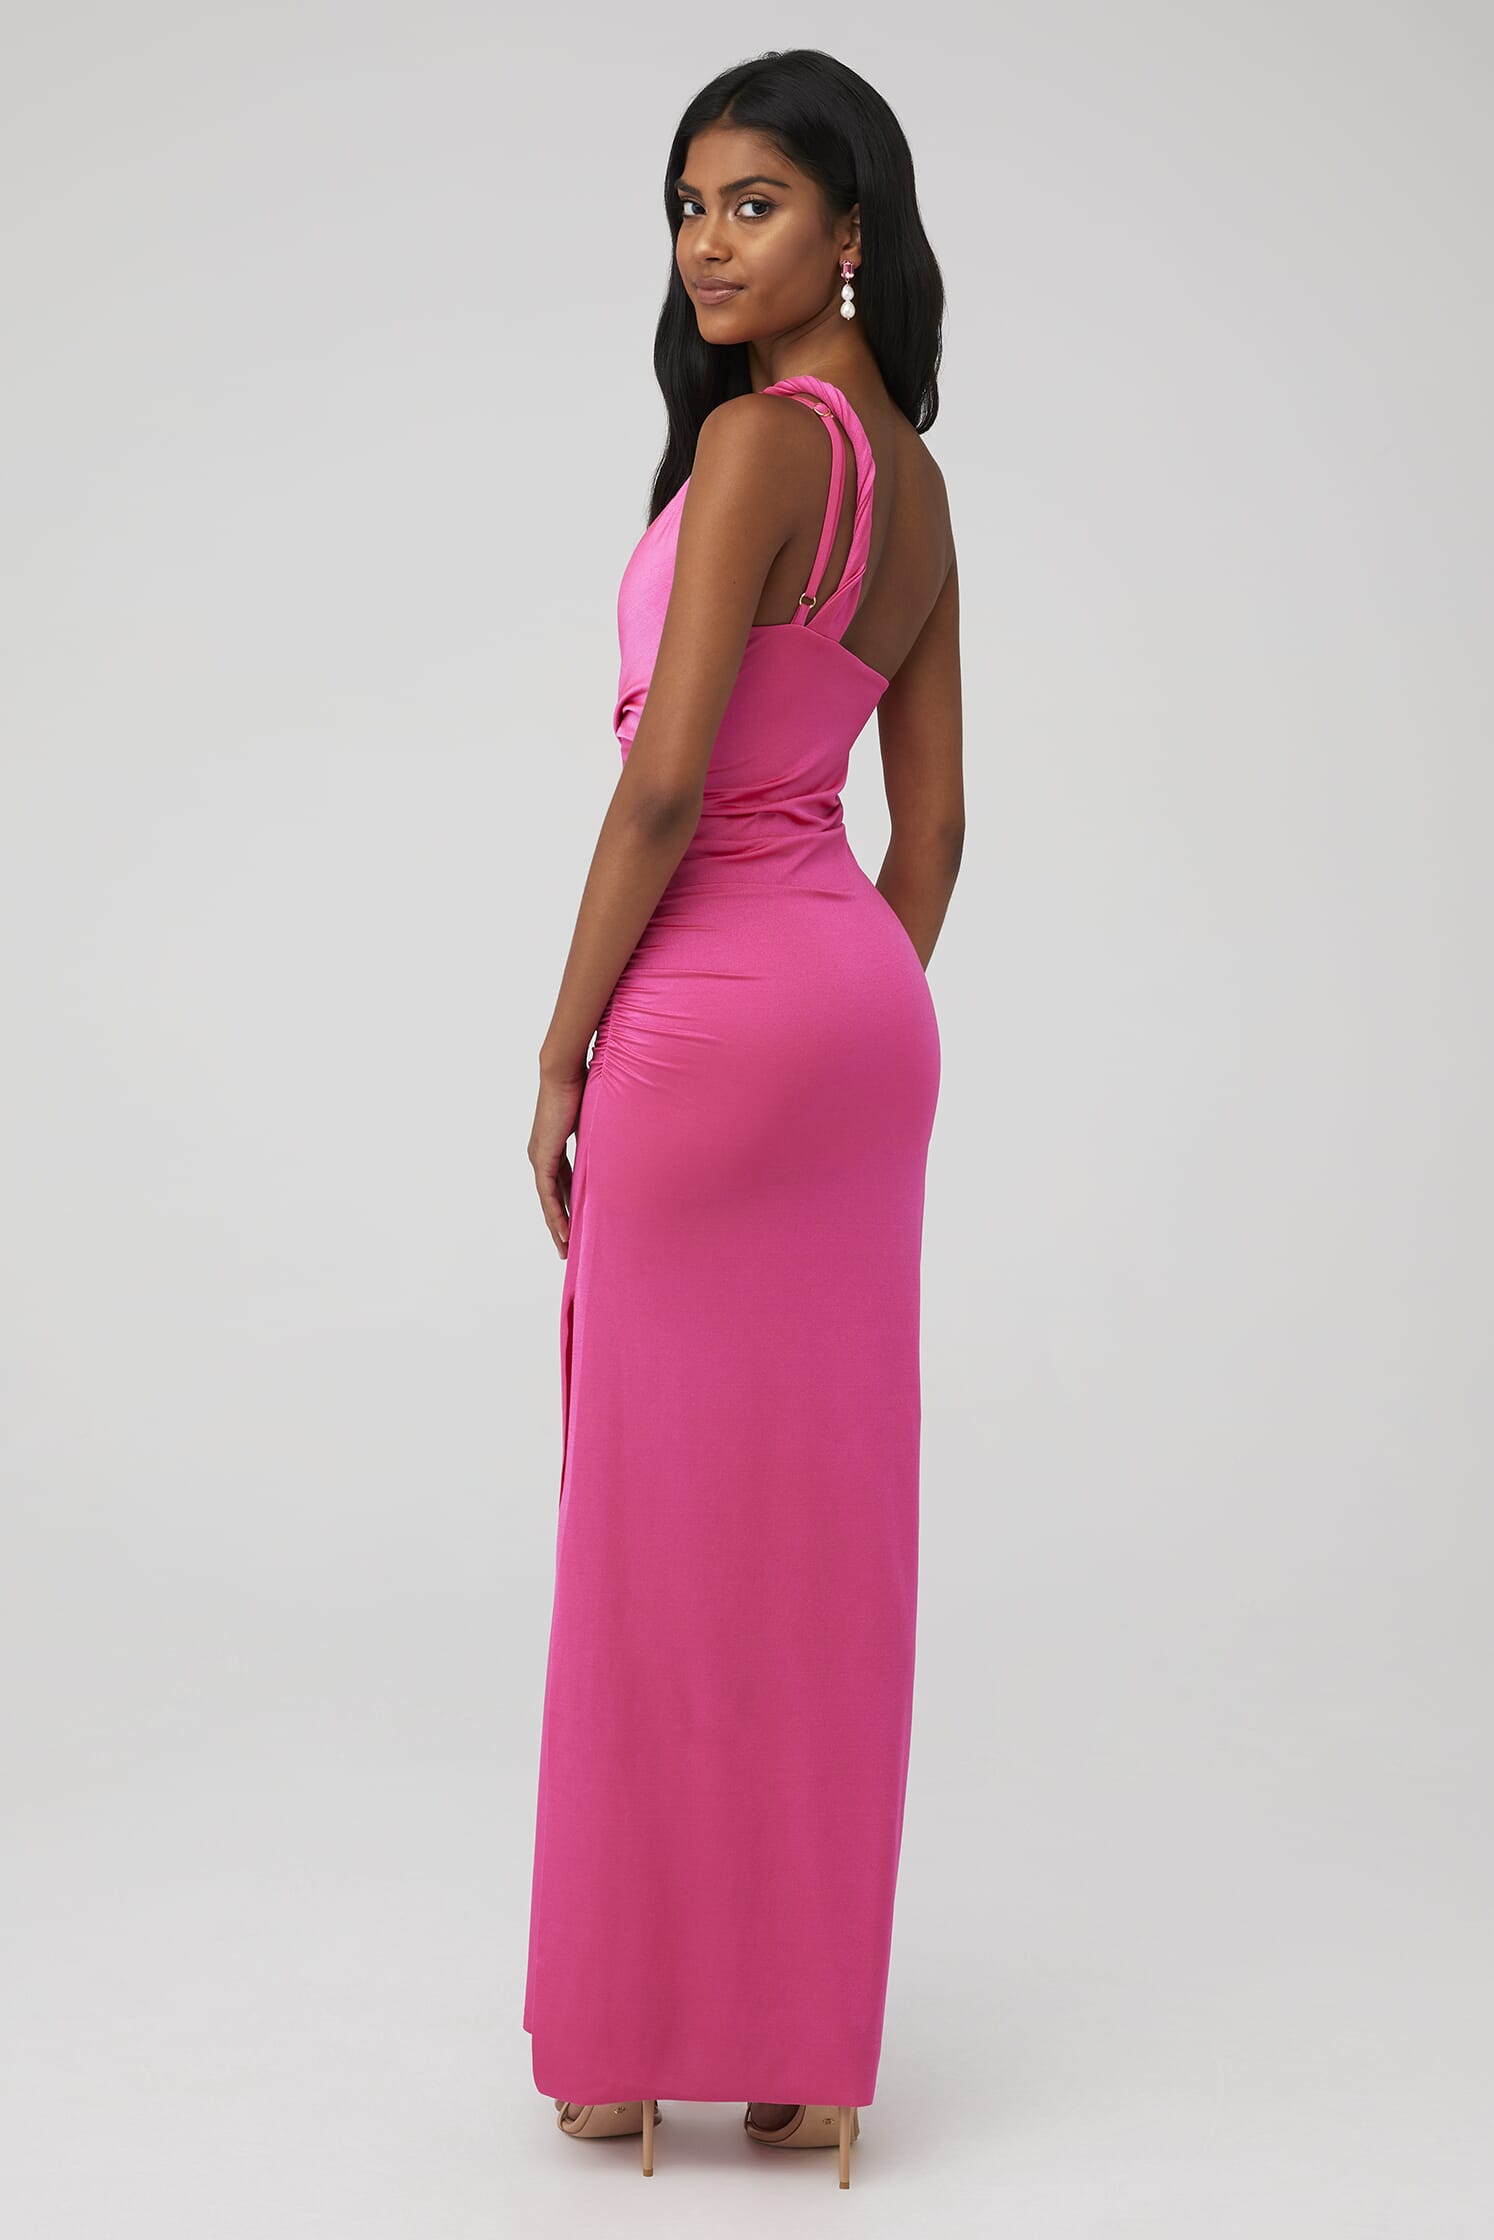 By Johnny Alessia Gather Strapless Midi Dress in Pink